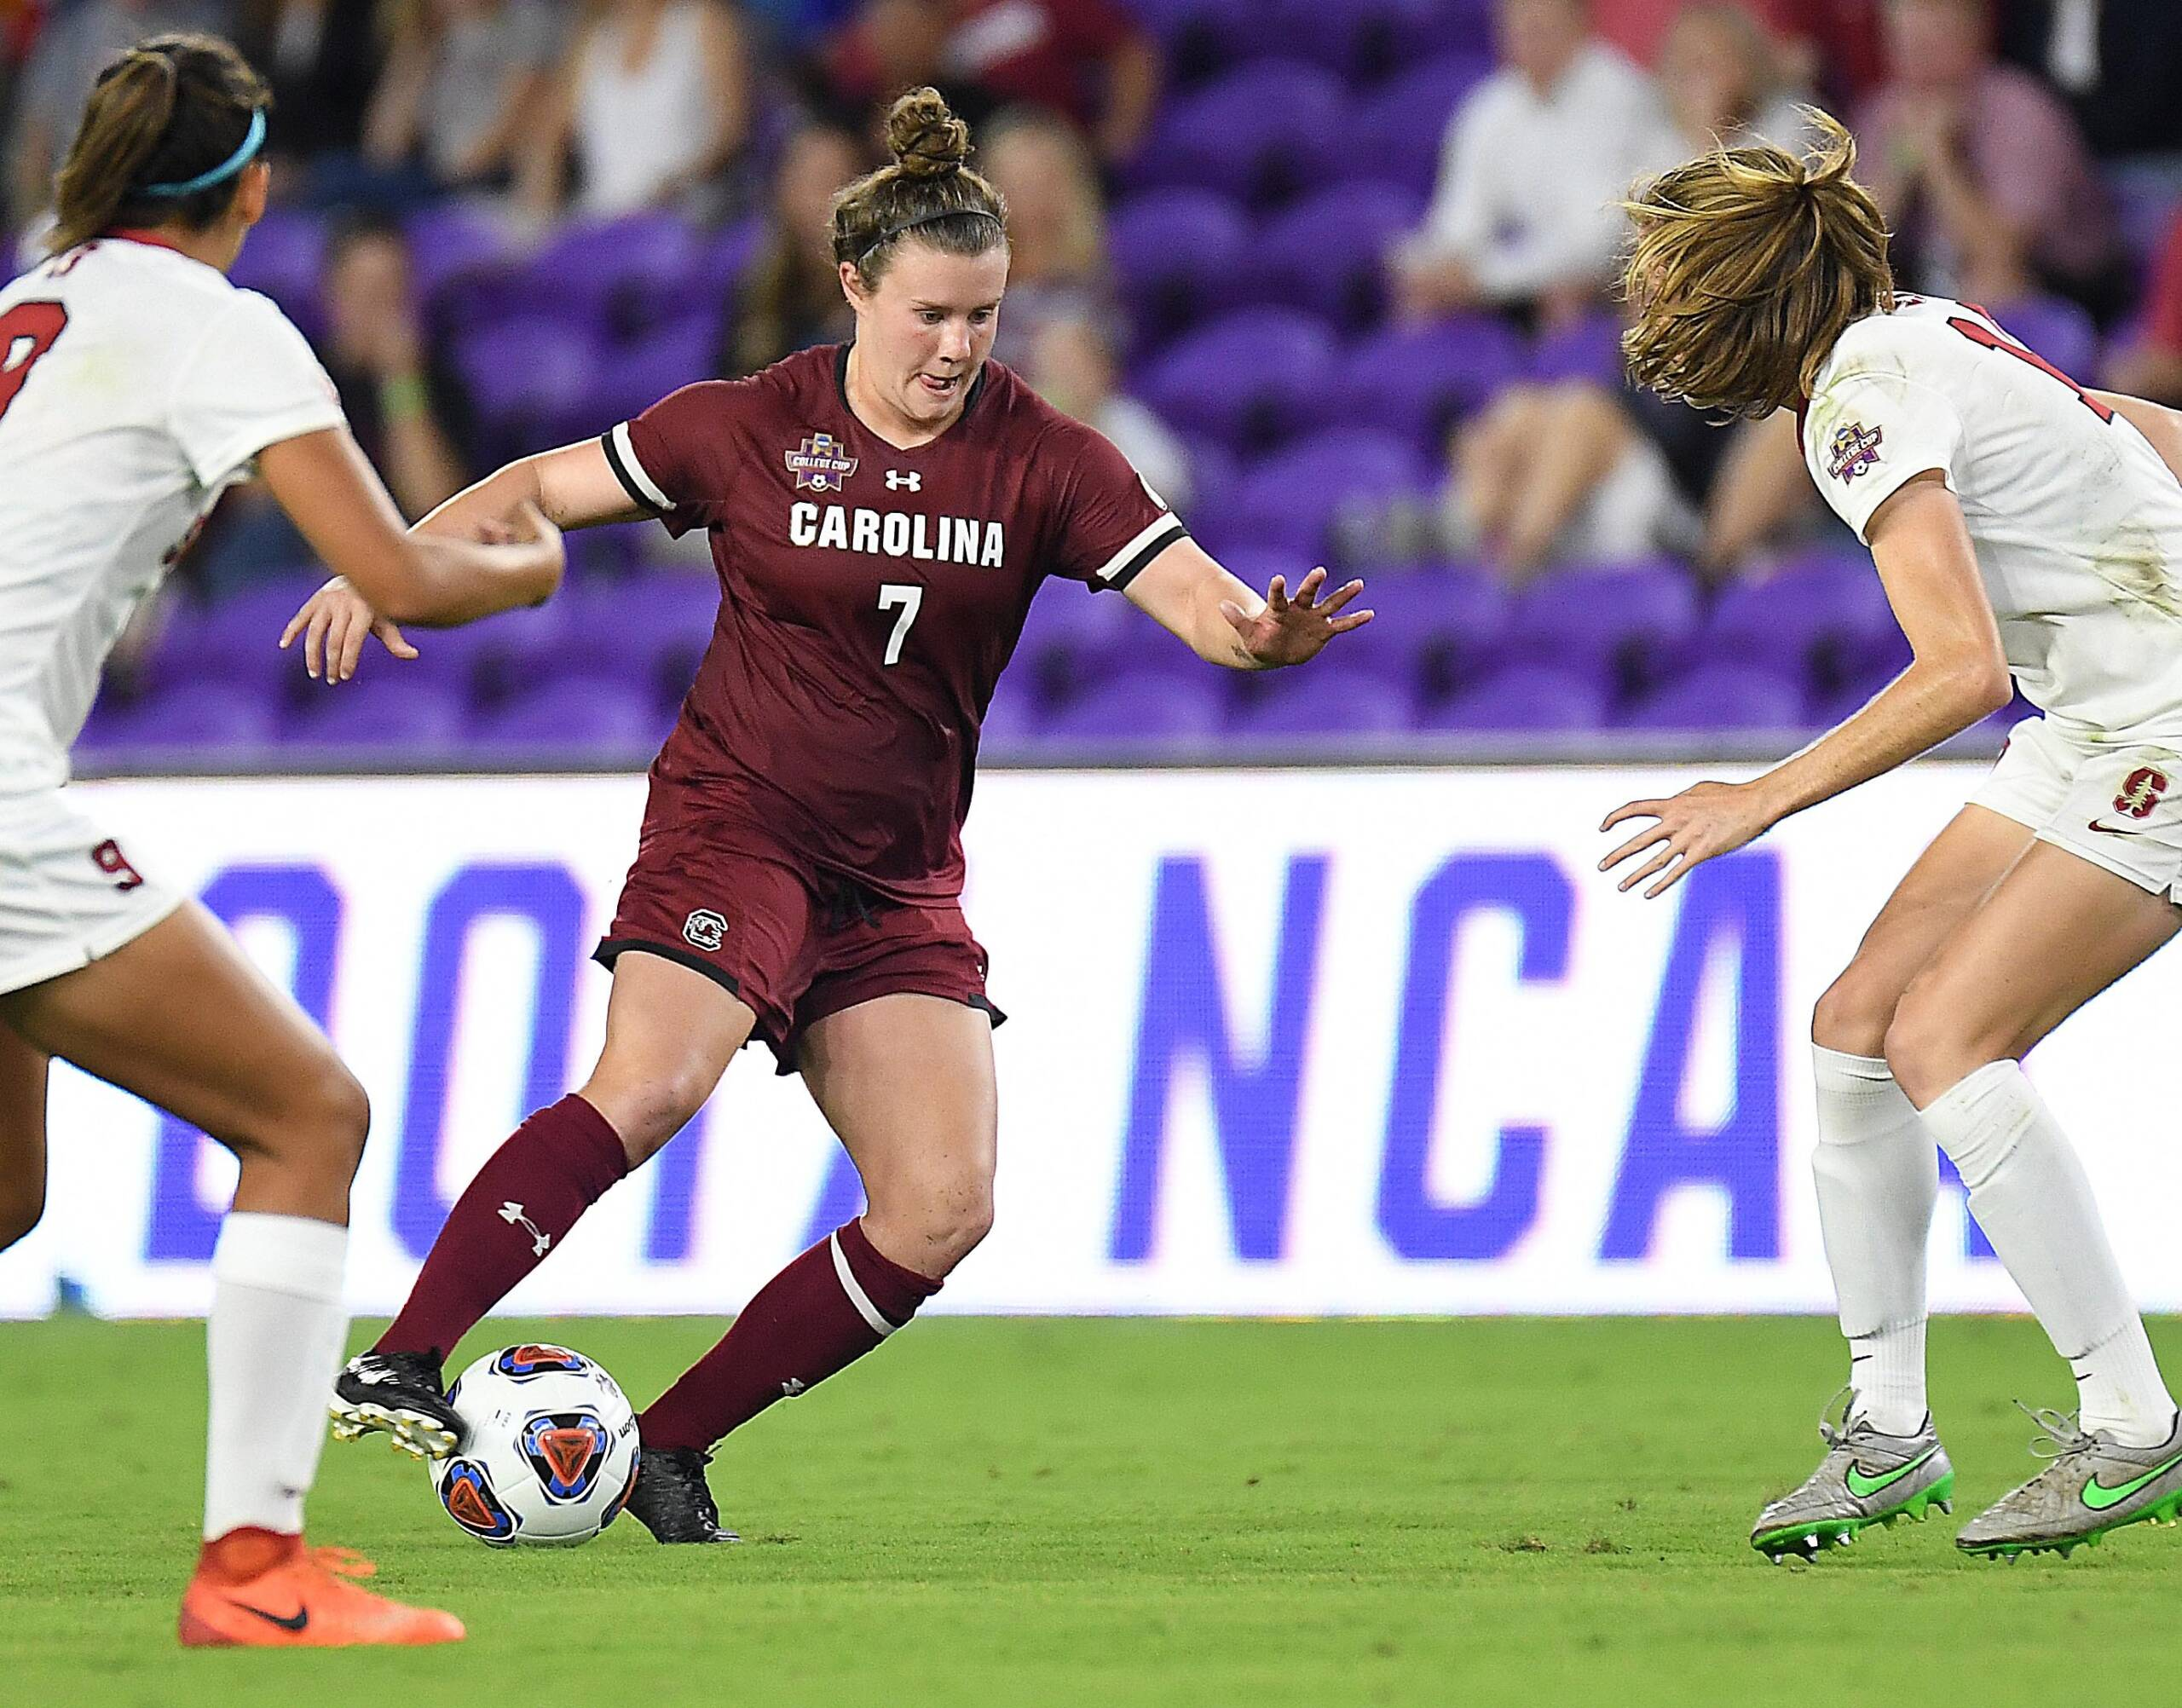 Gamecocks Fall To Stanford 2-0 In College Cup Semifinals